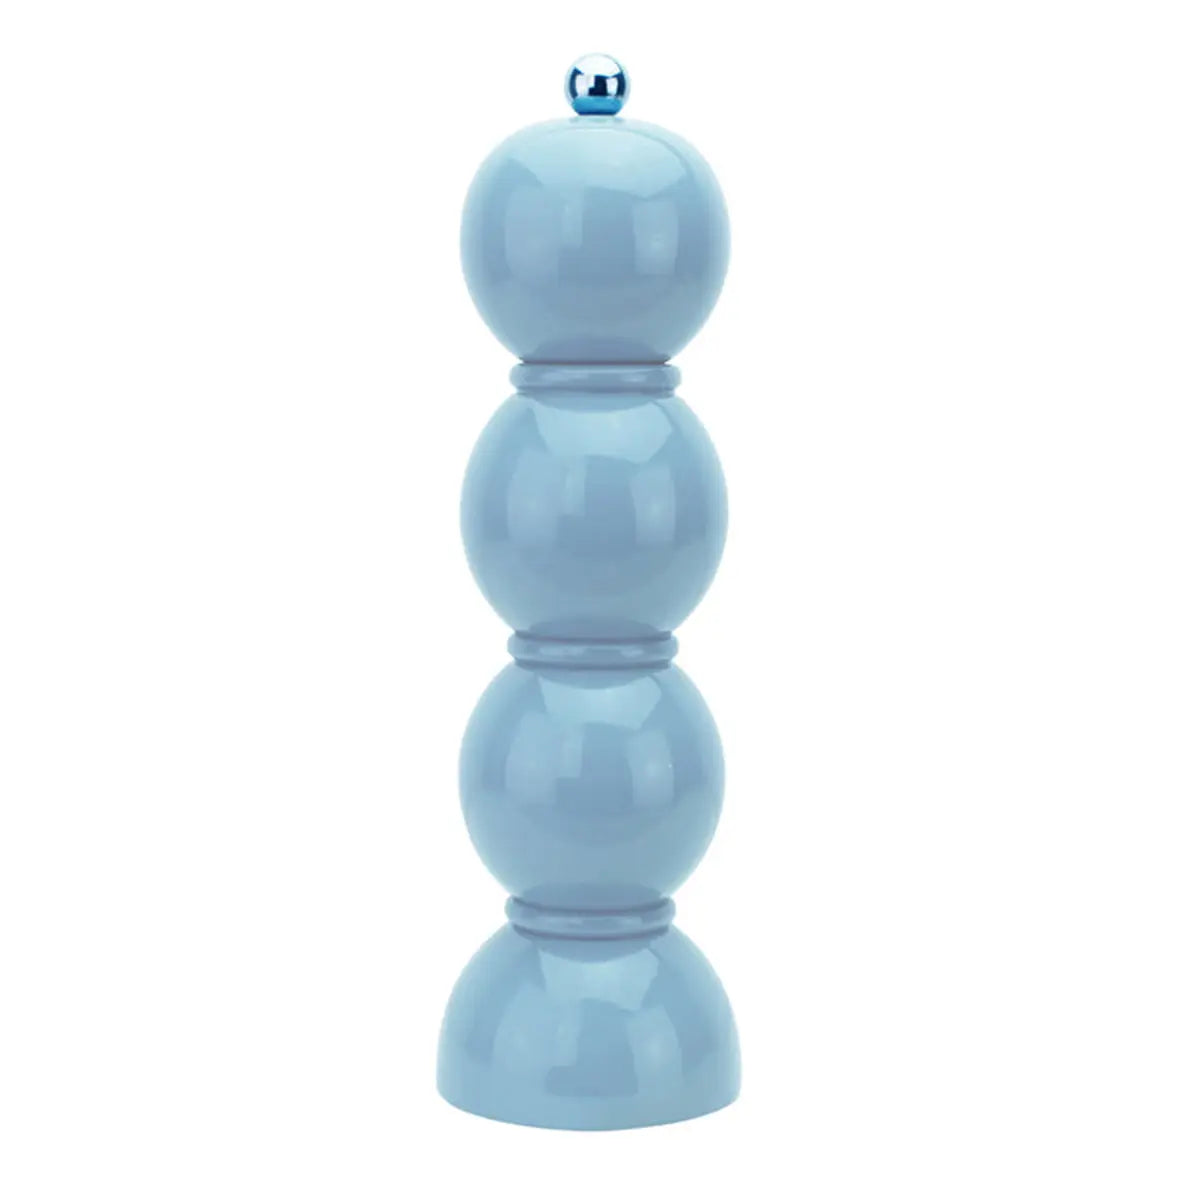 Addison Ross Salt and Pepper Grinder in Periwinkle